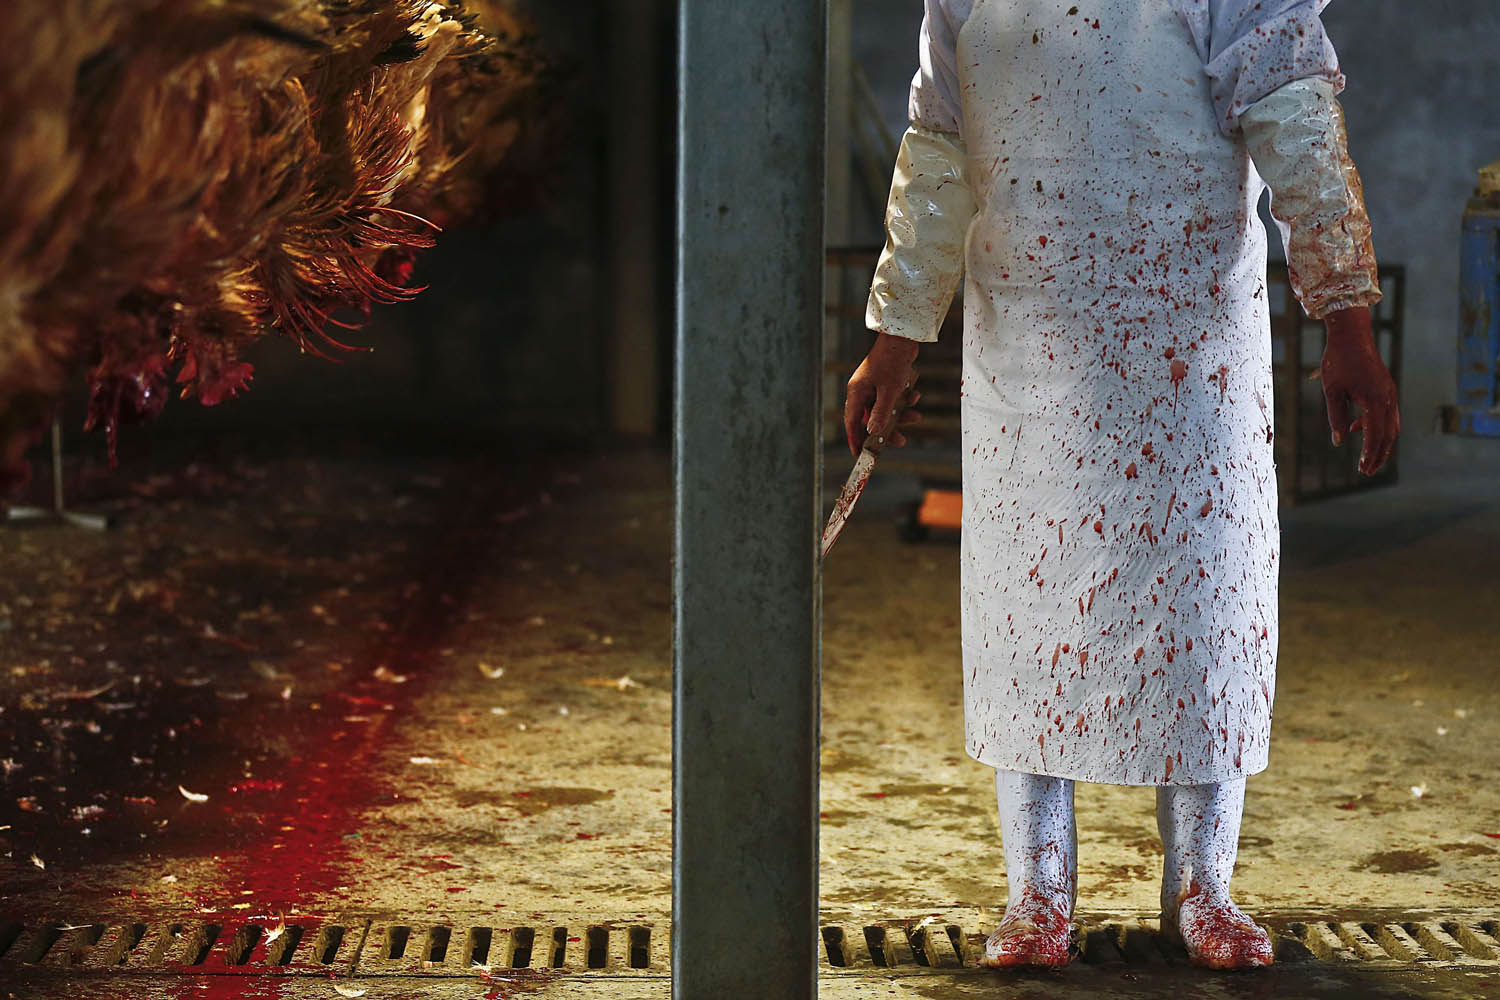 An employee holding a knife stands next to chickens on a processing production line at a slaughter house in Shanghai